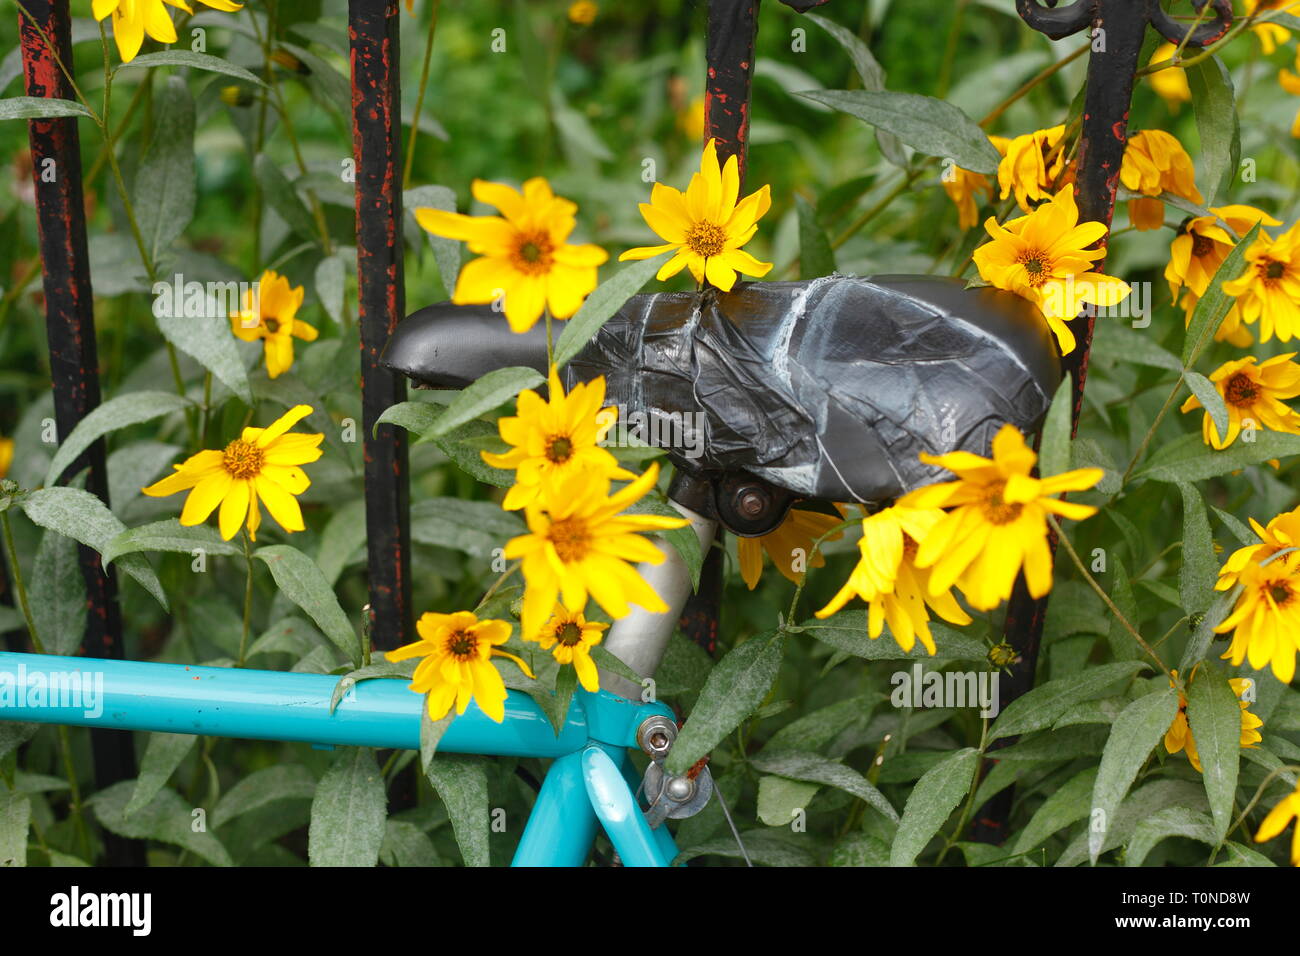 Bicycle saddle, garden fence and blooming yellow sun hat, flowers, Germany Stock Photo